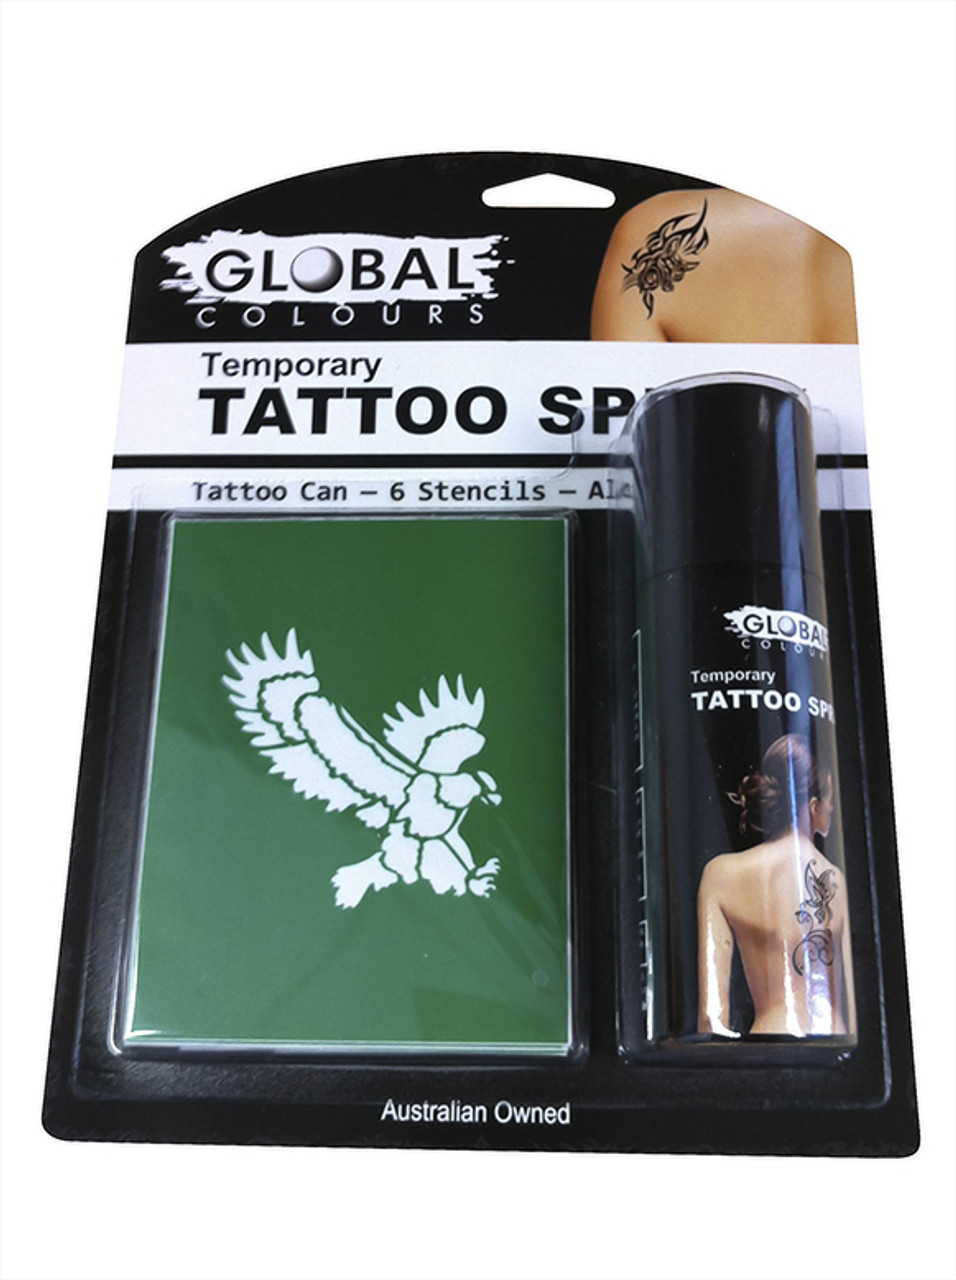 Airbrush Tattoo services in Singapore